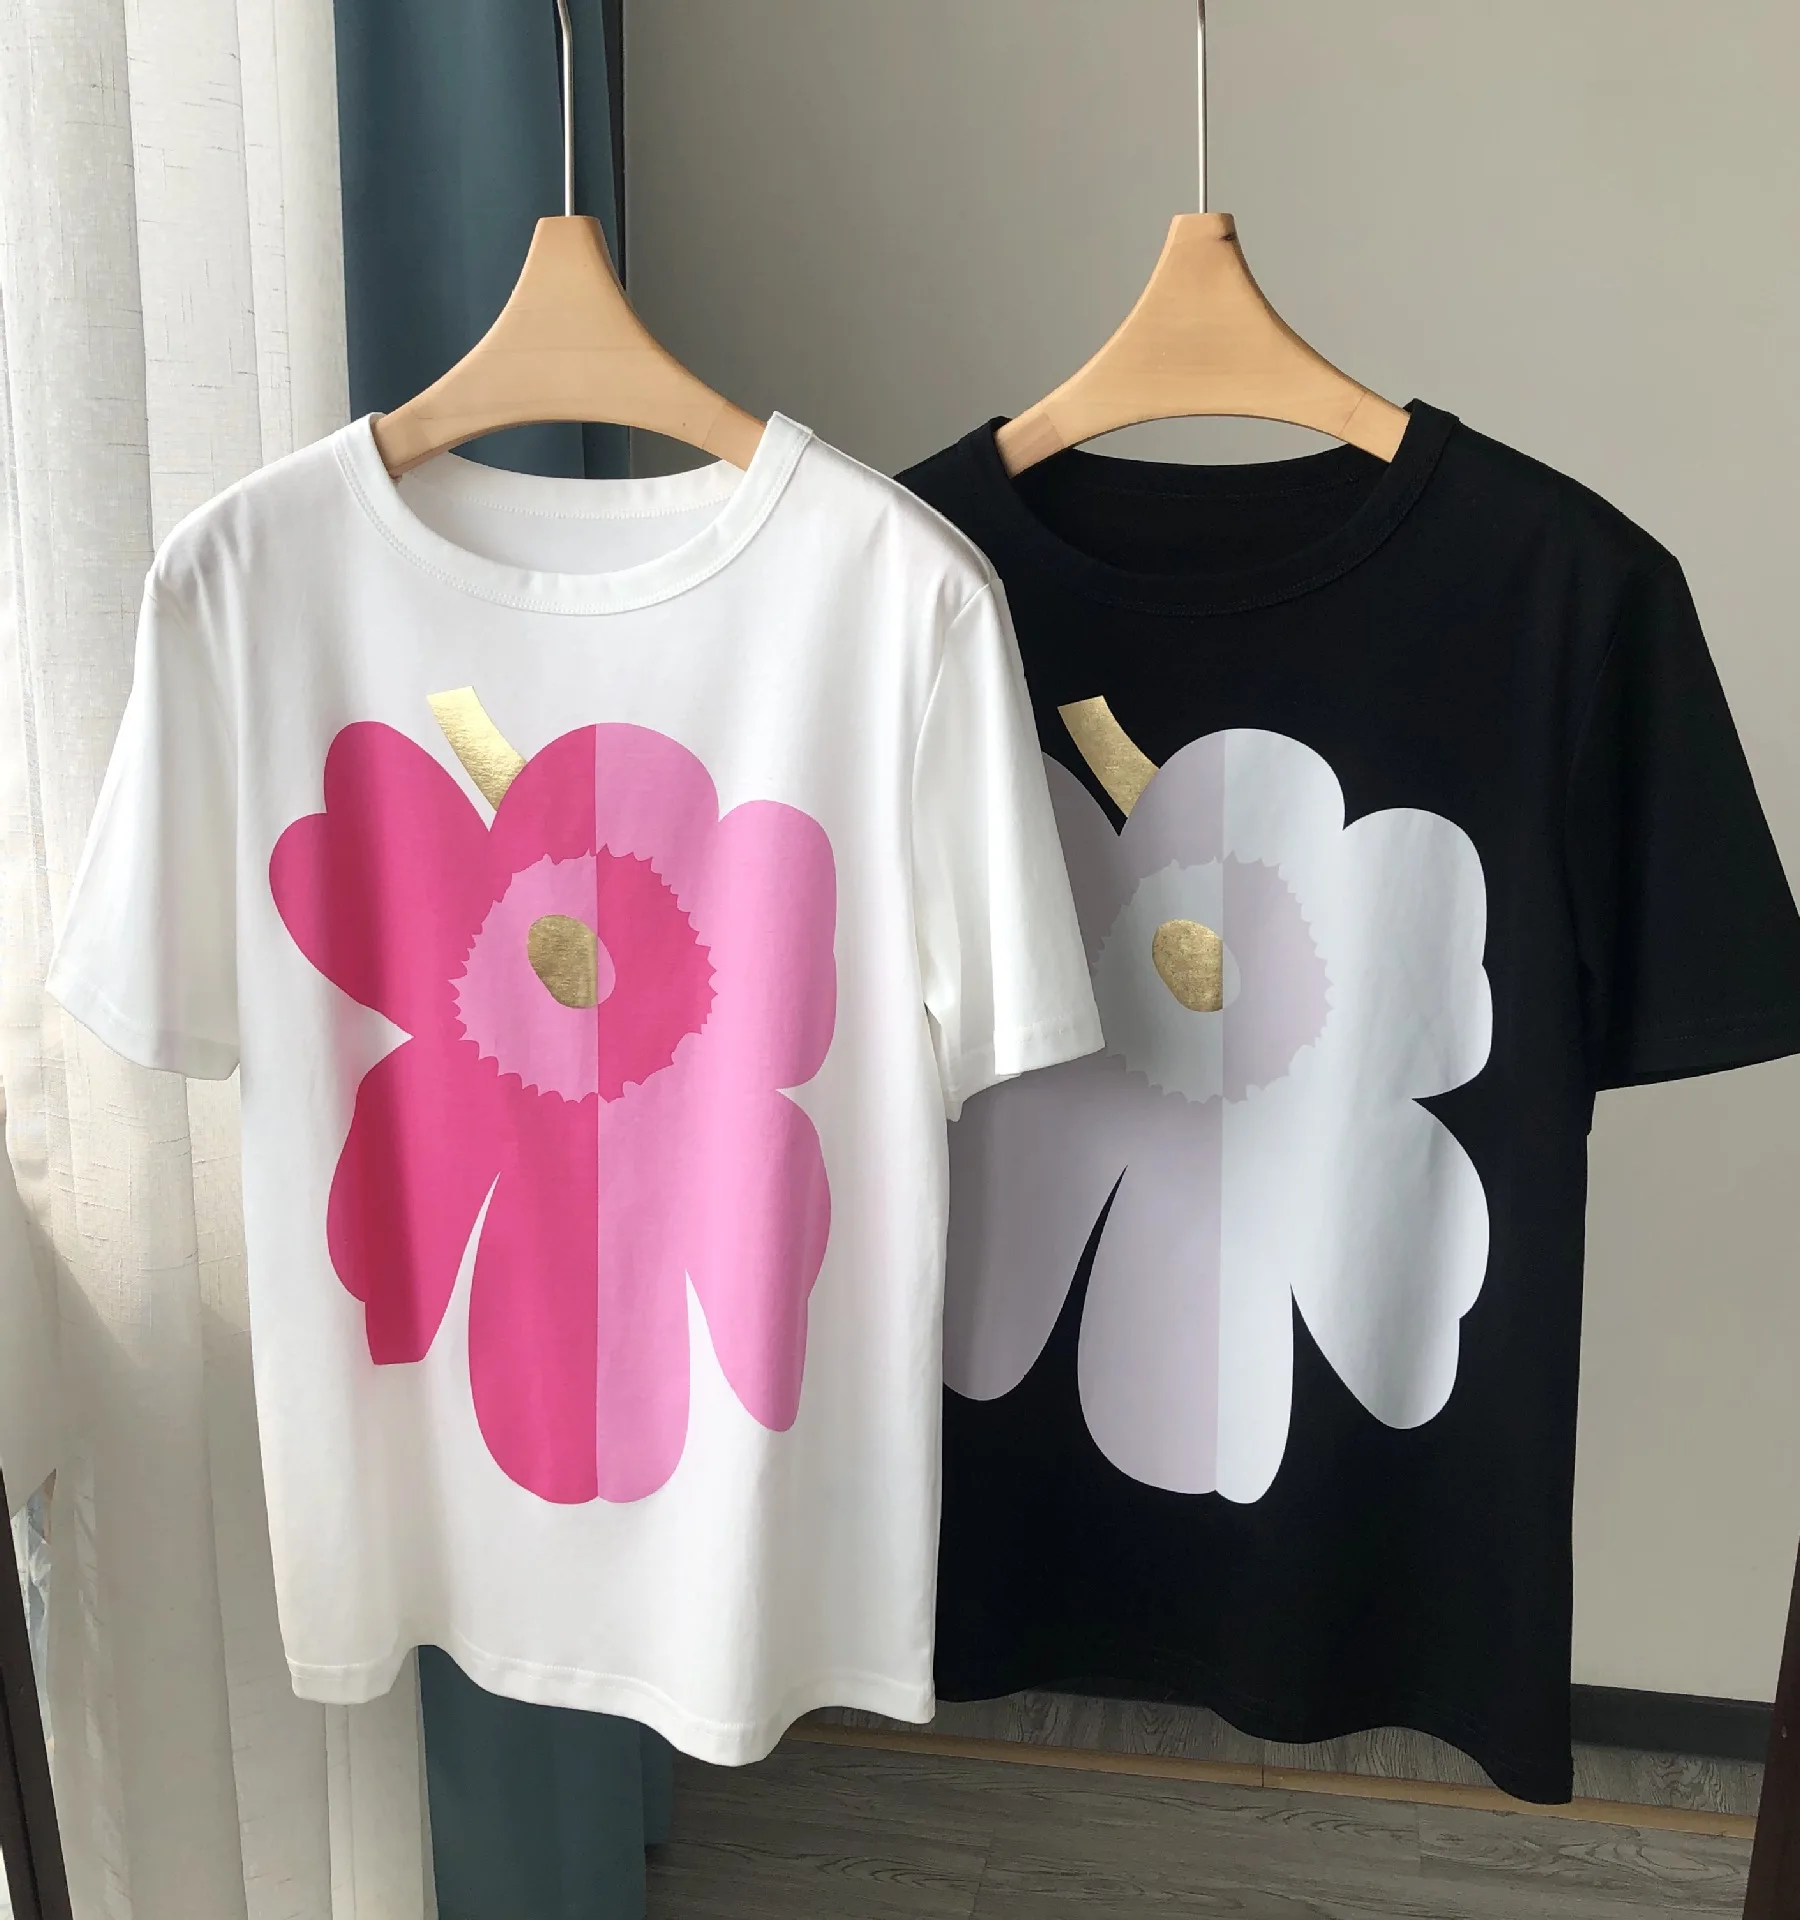 2023 Summer Europe Style Chic Women's High Quality Flower Print Cotton T-shirt Tee Tops C887